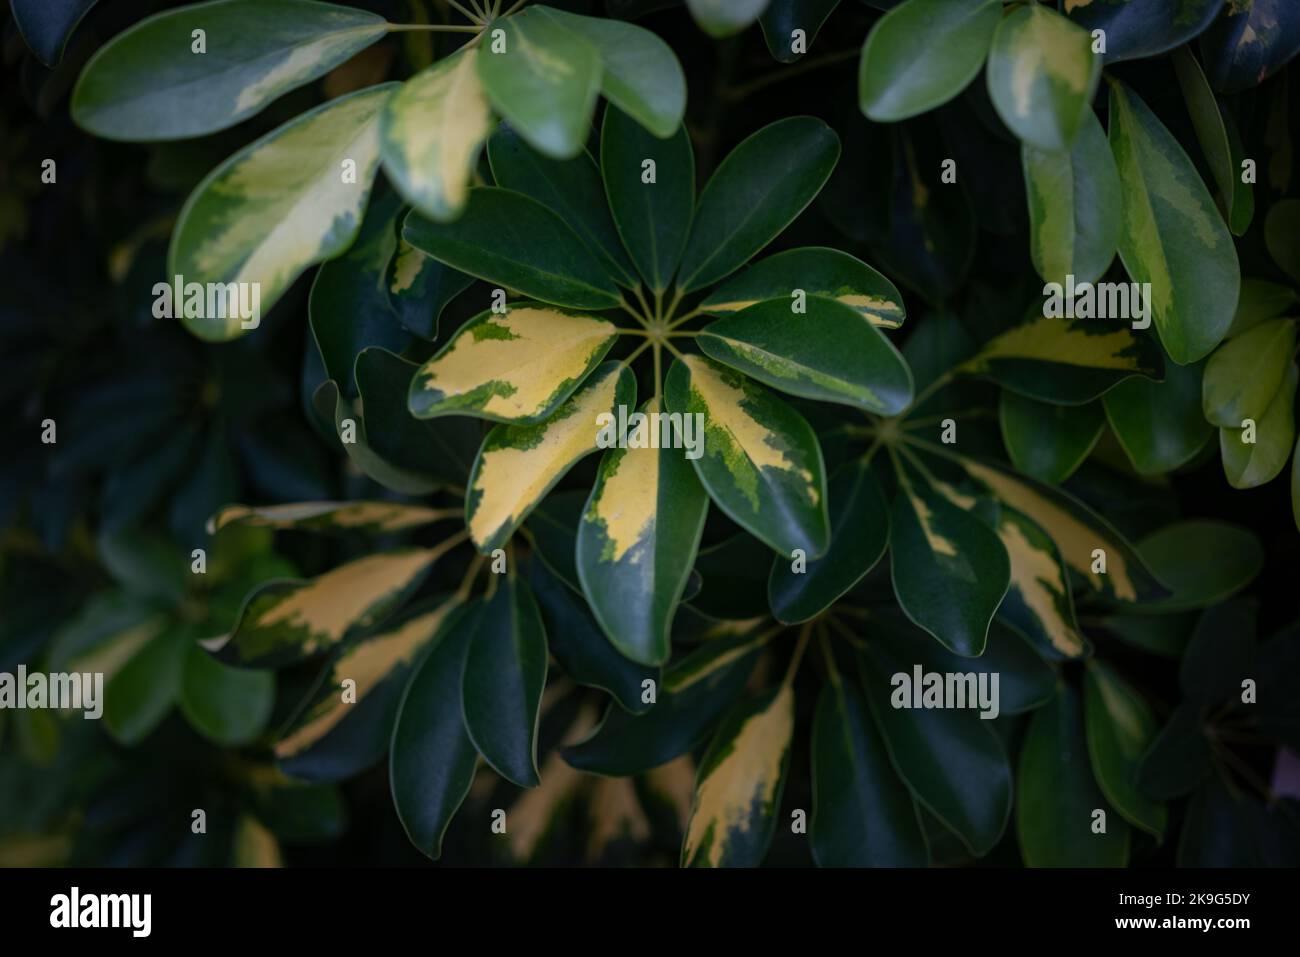 Schefflera background. Variagated leaves with yellow pattern Stock Photo